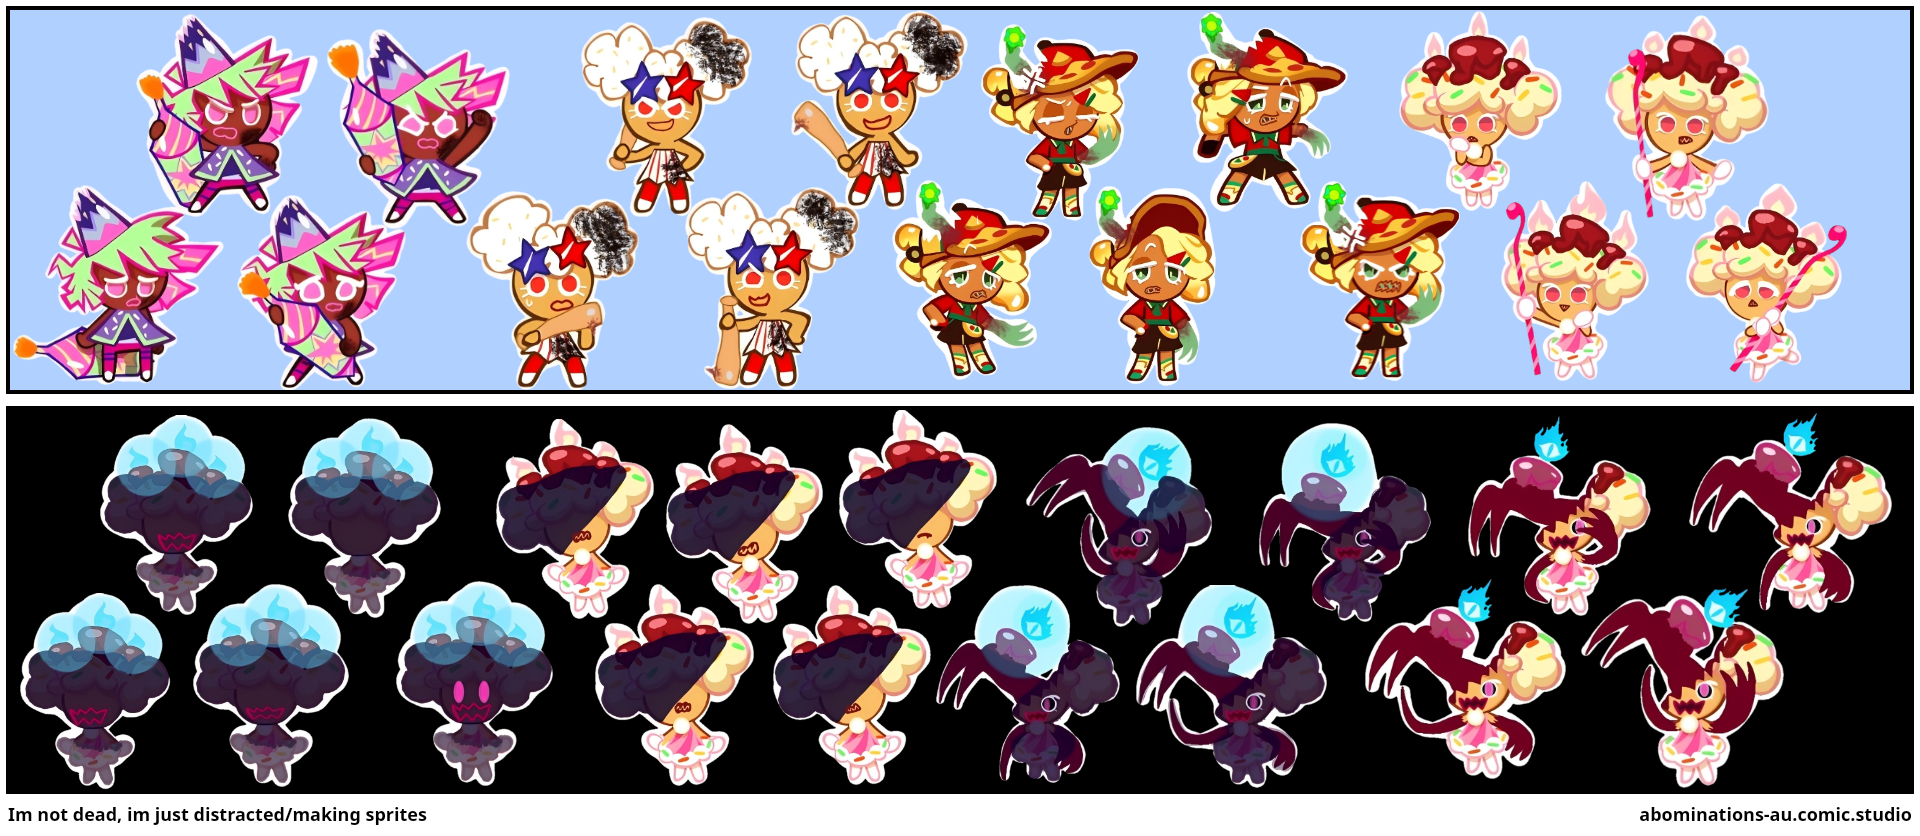 Im not dead, im just distracted/making sprites 